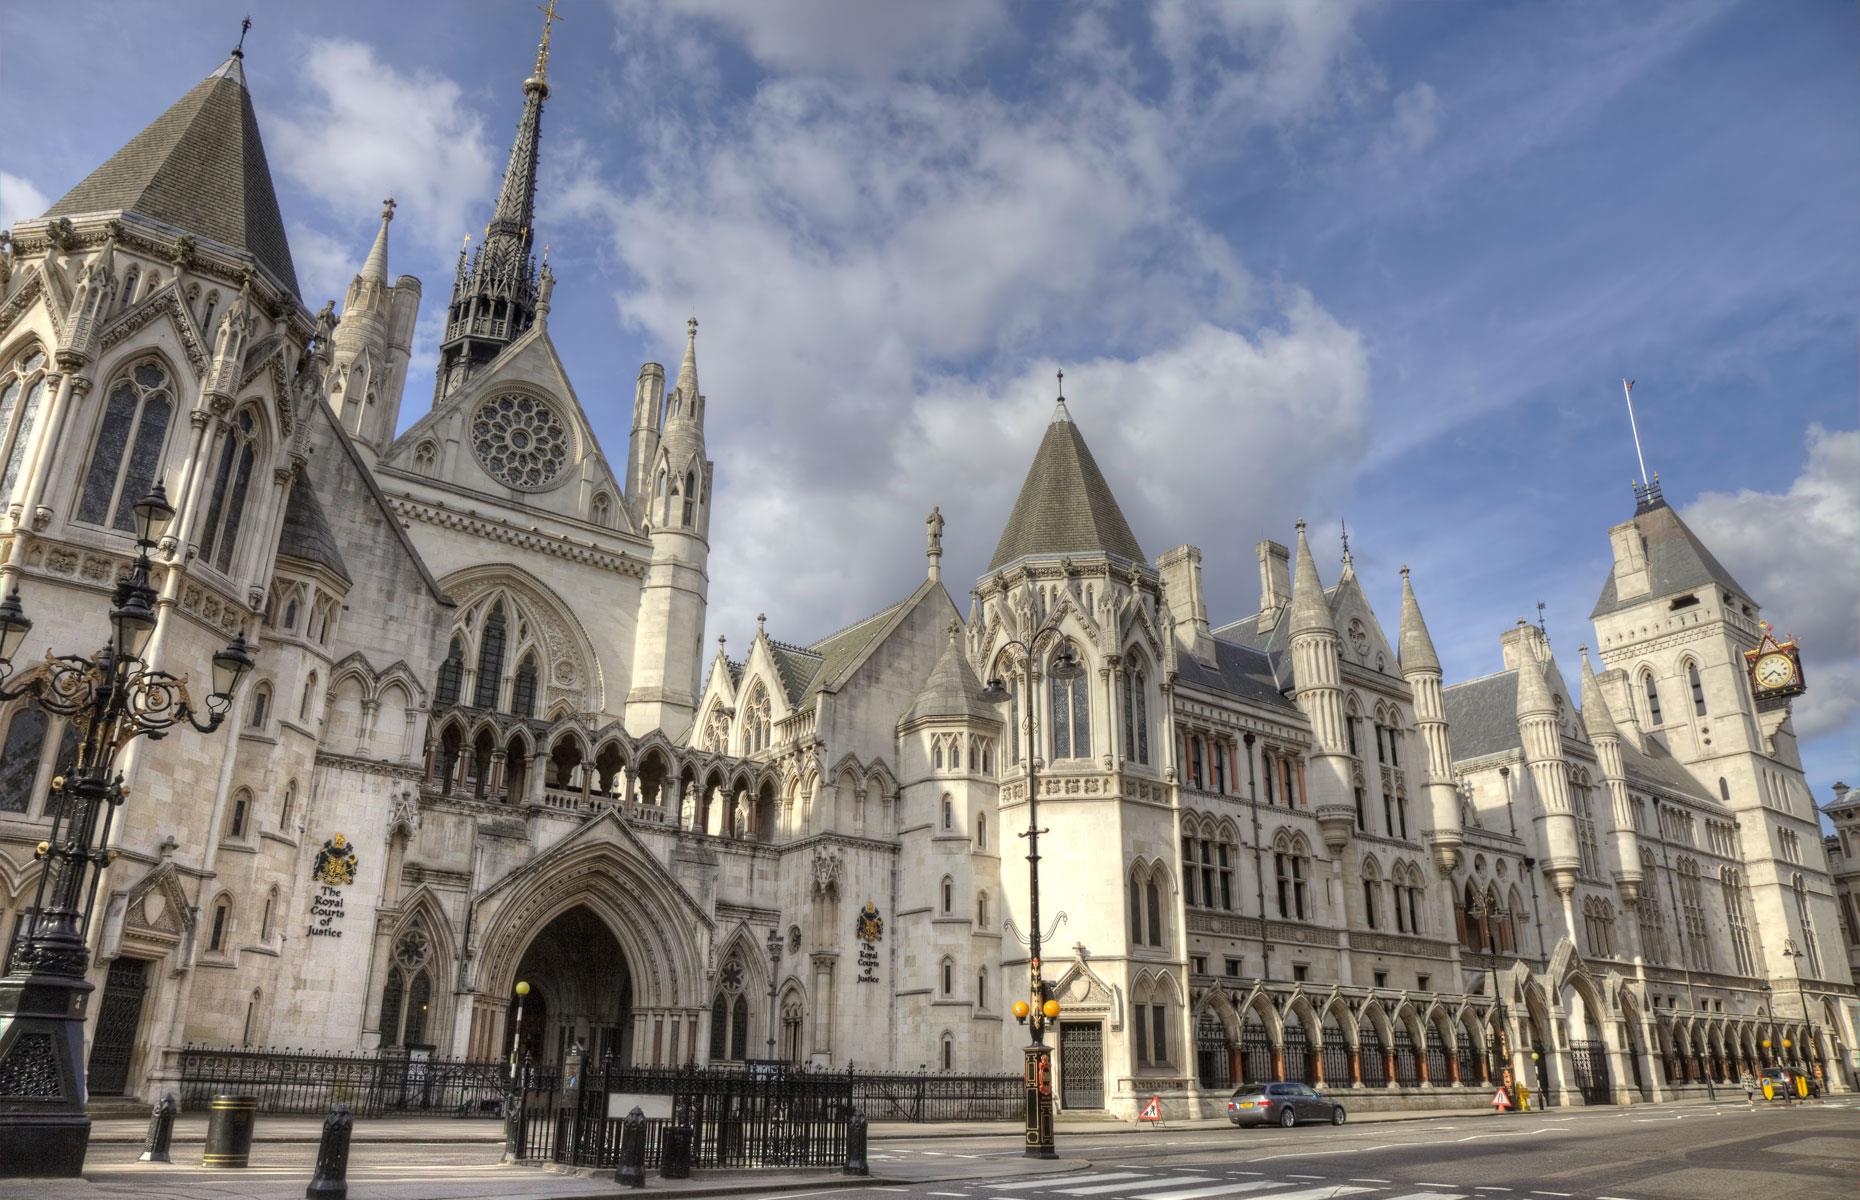 London's Royal Courts of Justice building, which was opened by Queen Victoria in 1882, was designed by George Edmund Street, one of the leading figures in the Victorian Gothic Revival movement, hence the medieval cathedral-like turrets and church-inspired windows.